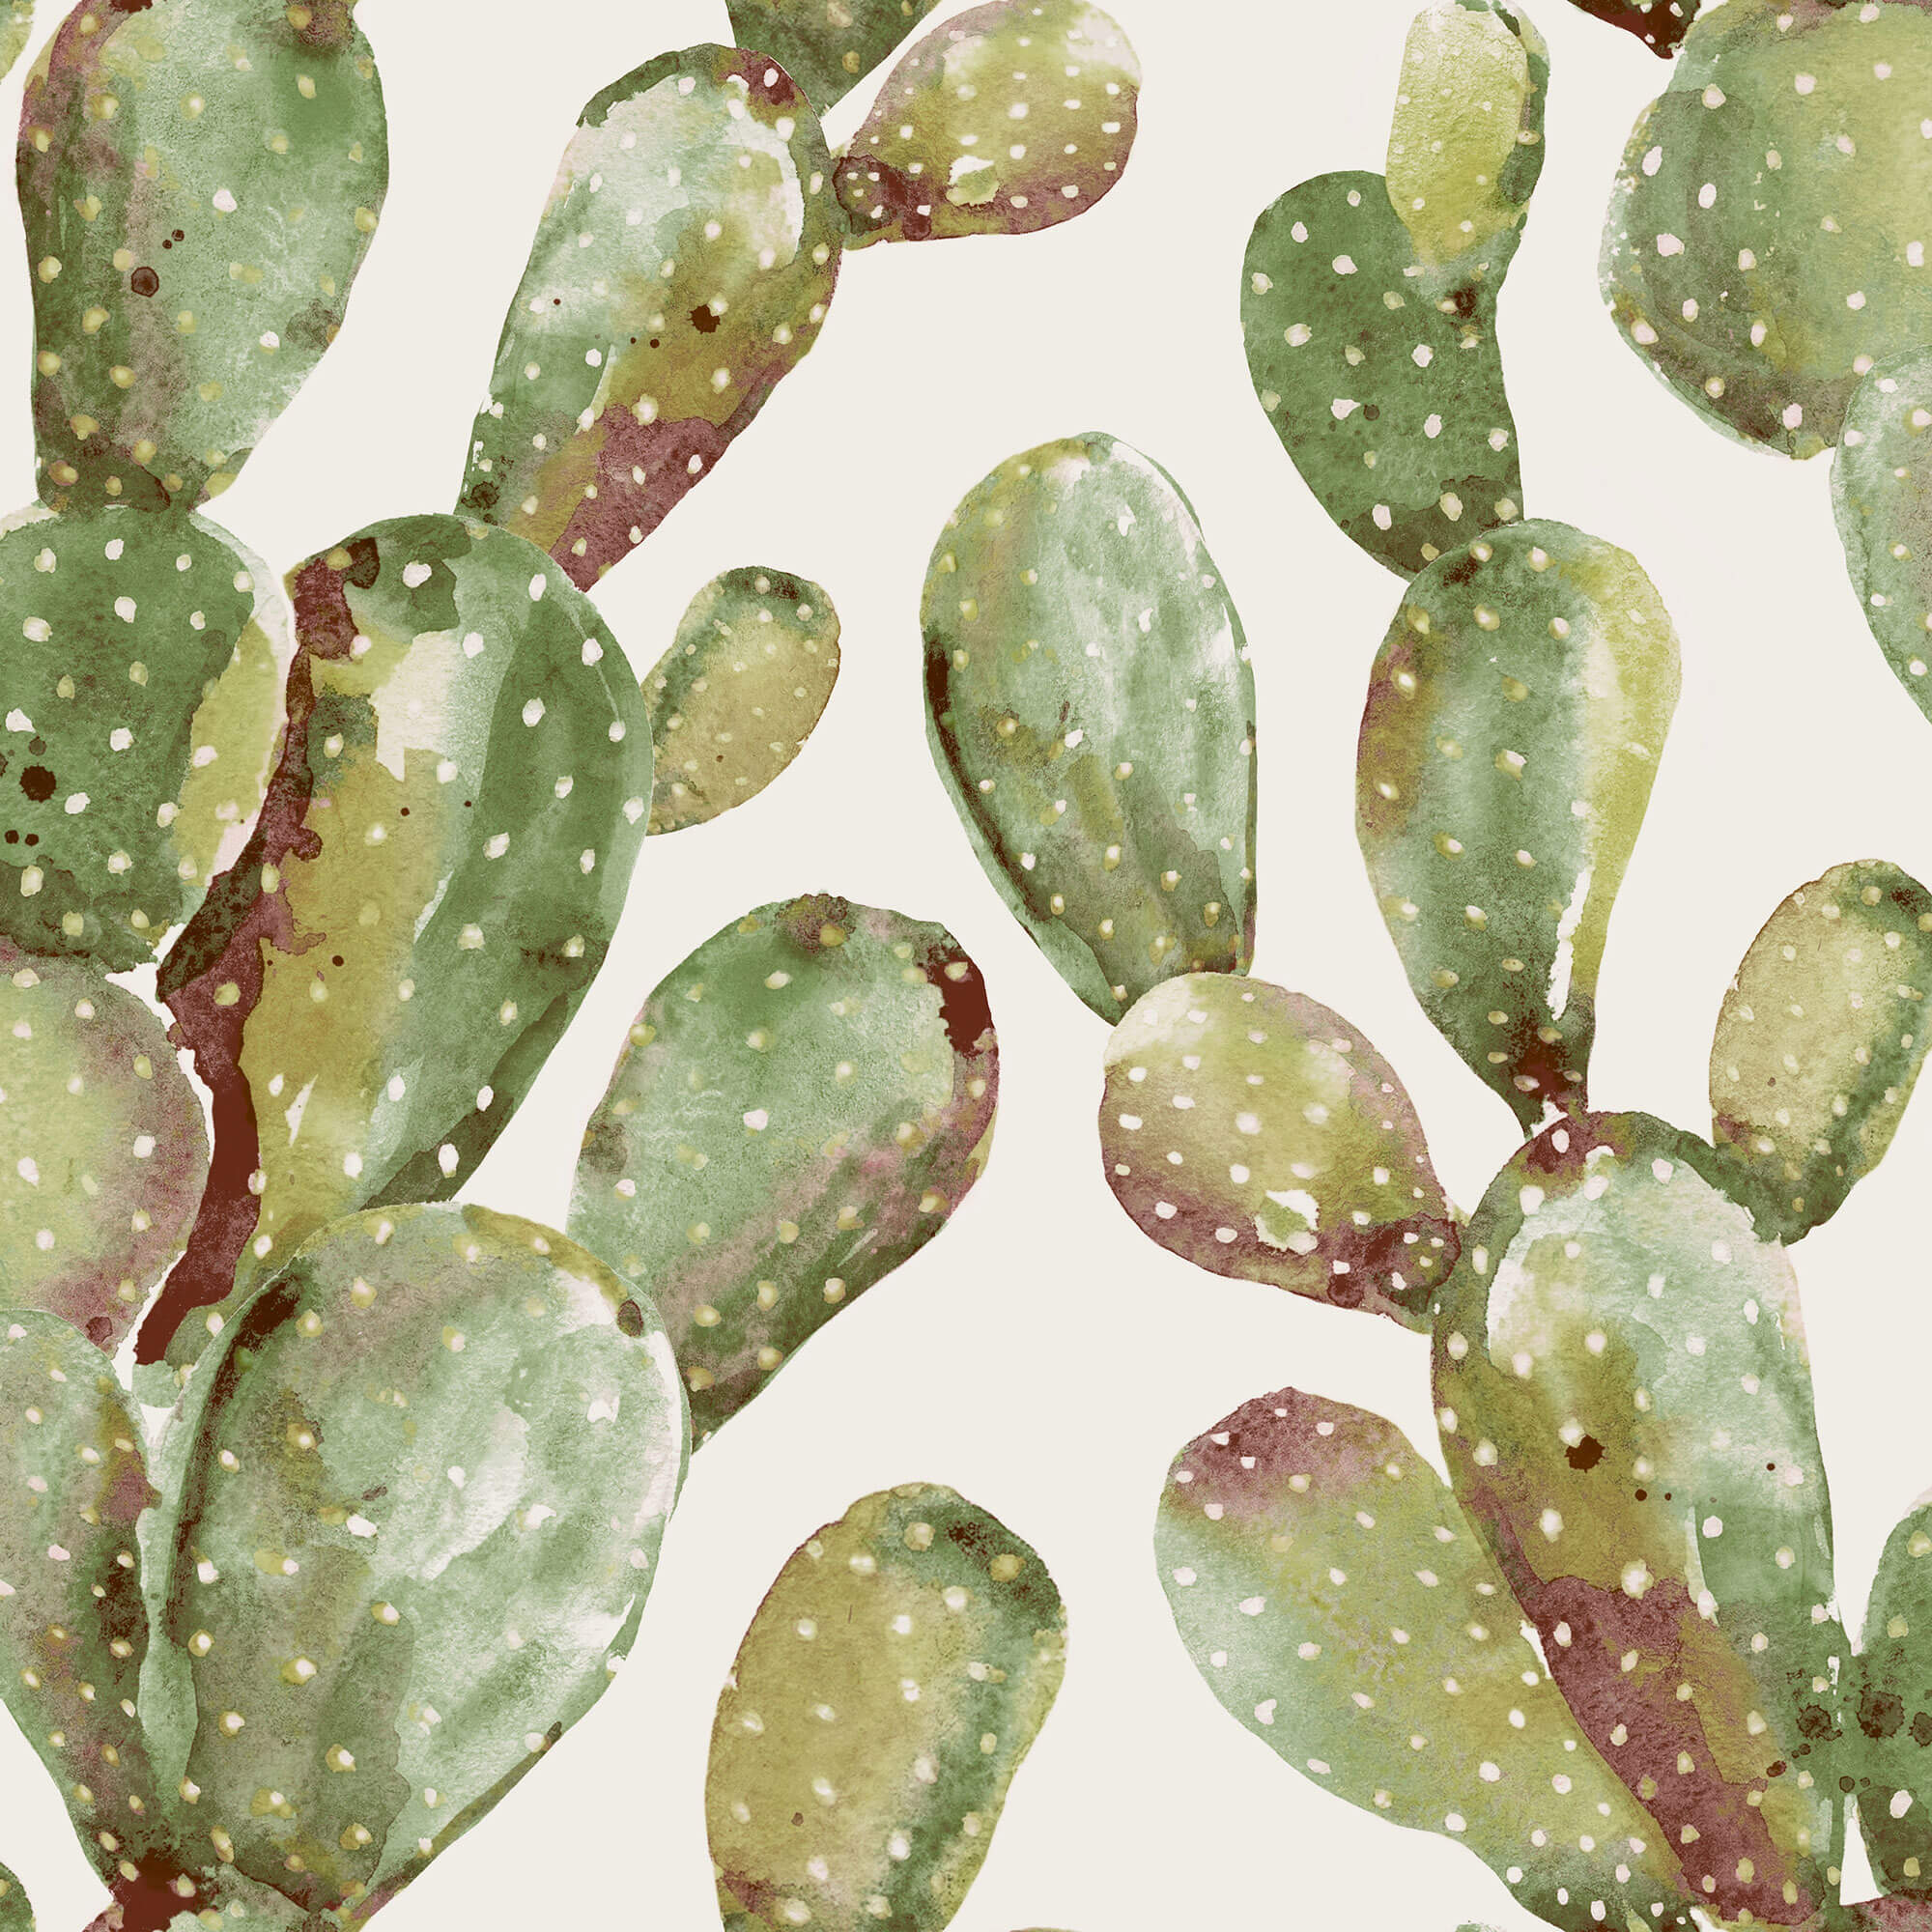 Prickly Pear season is upon us in far West Texas – Because Food is What I Do